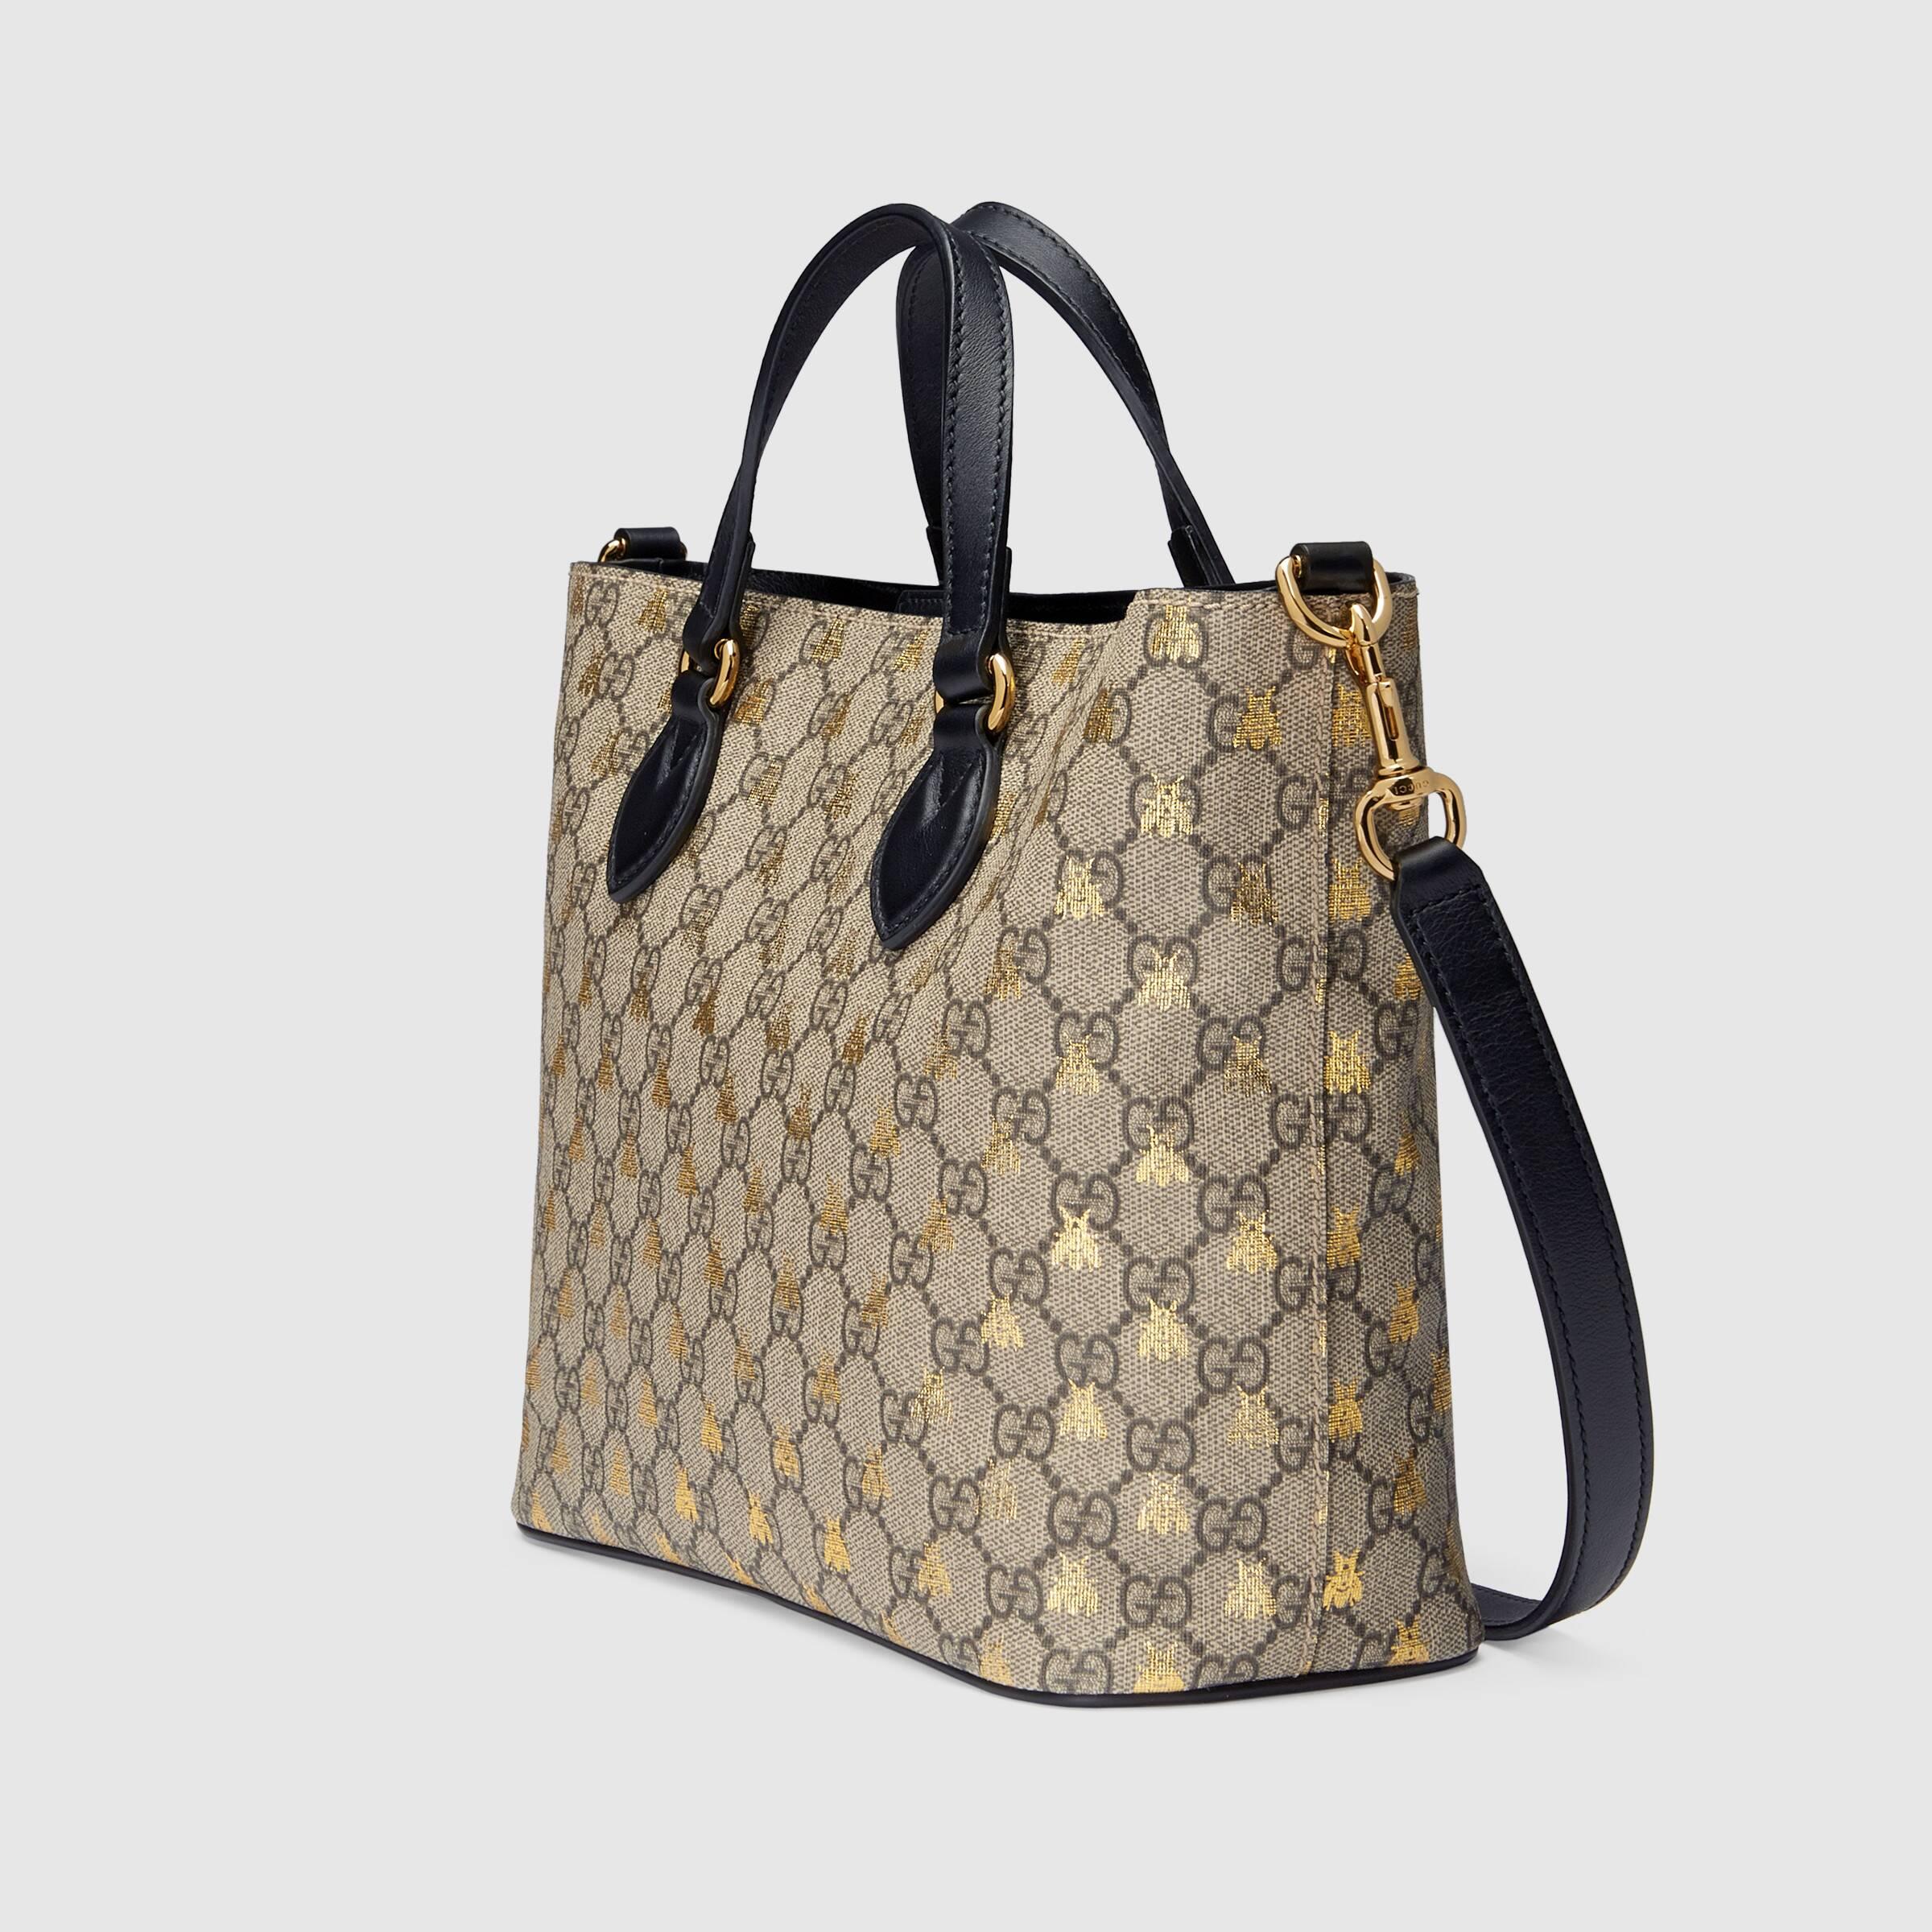 Gucci Bee Gg Supreme Canvas Tote in Beige (Natural) - Lyst